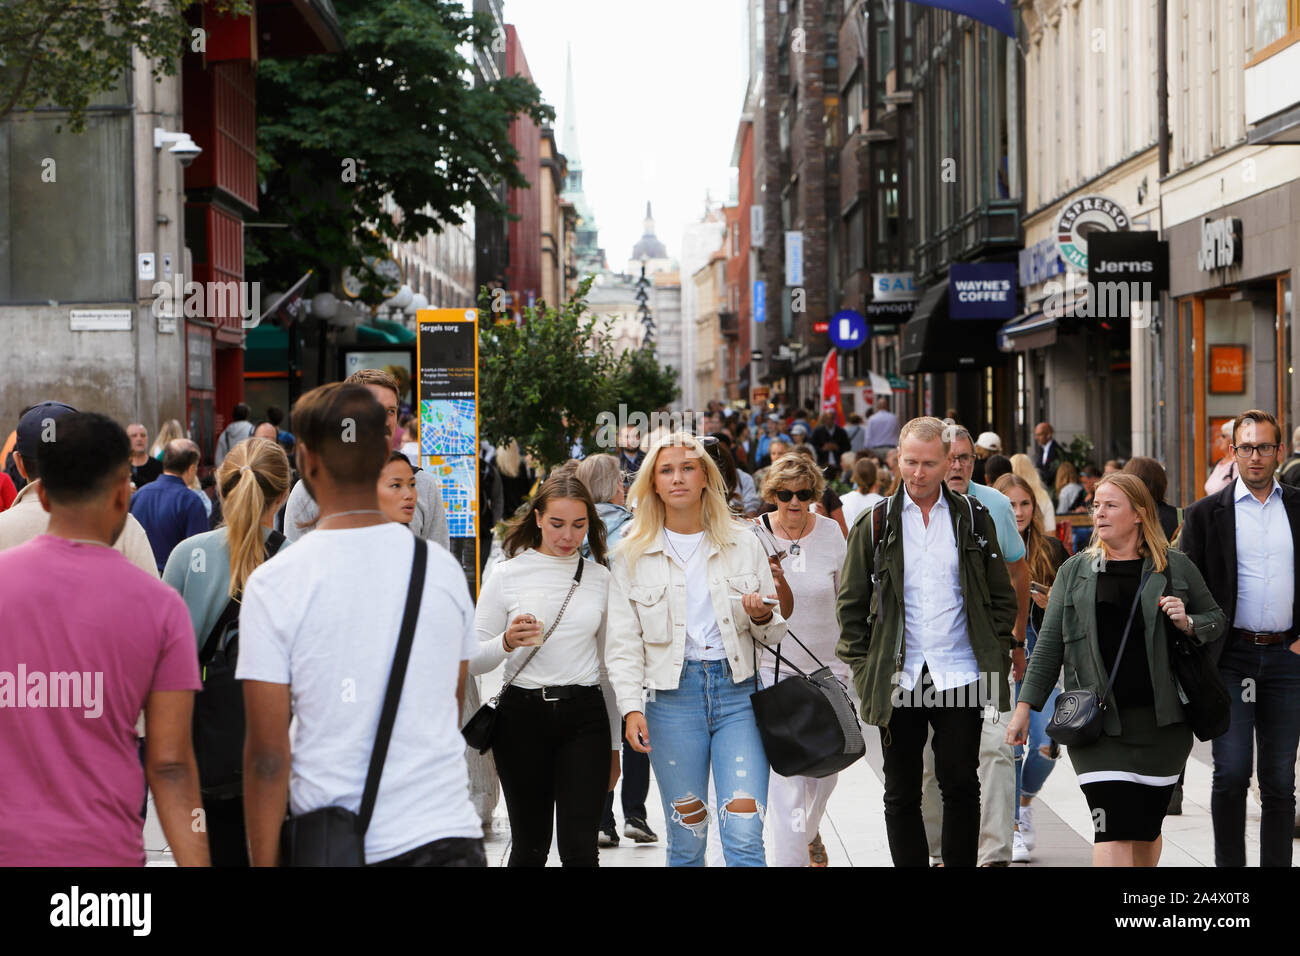 Stockholm, Sweden - August 15, 2019: Busy pedestrian only Drottninggatan street viewed at the Sergelstorgs square. Stock Photo